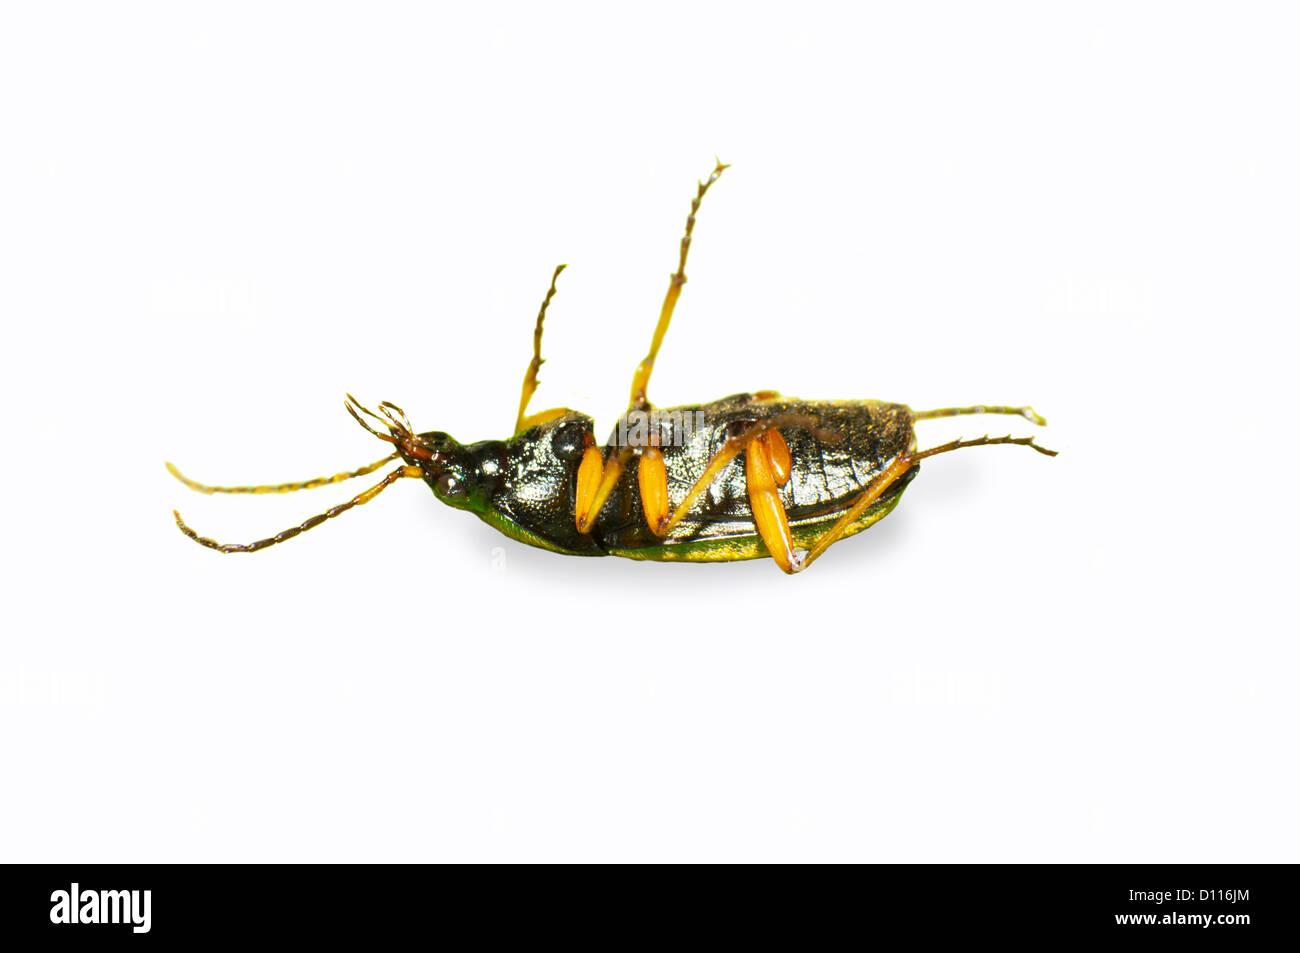 Beetles fall backwards with in the air of the hands and stretch our legs. Stock Photo